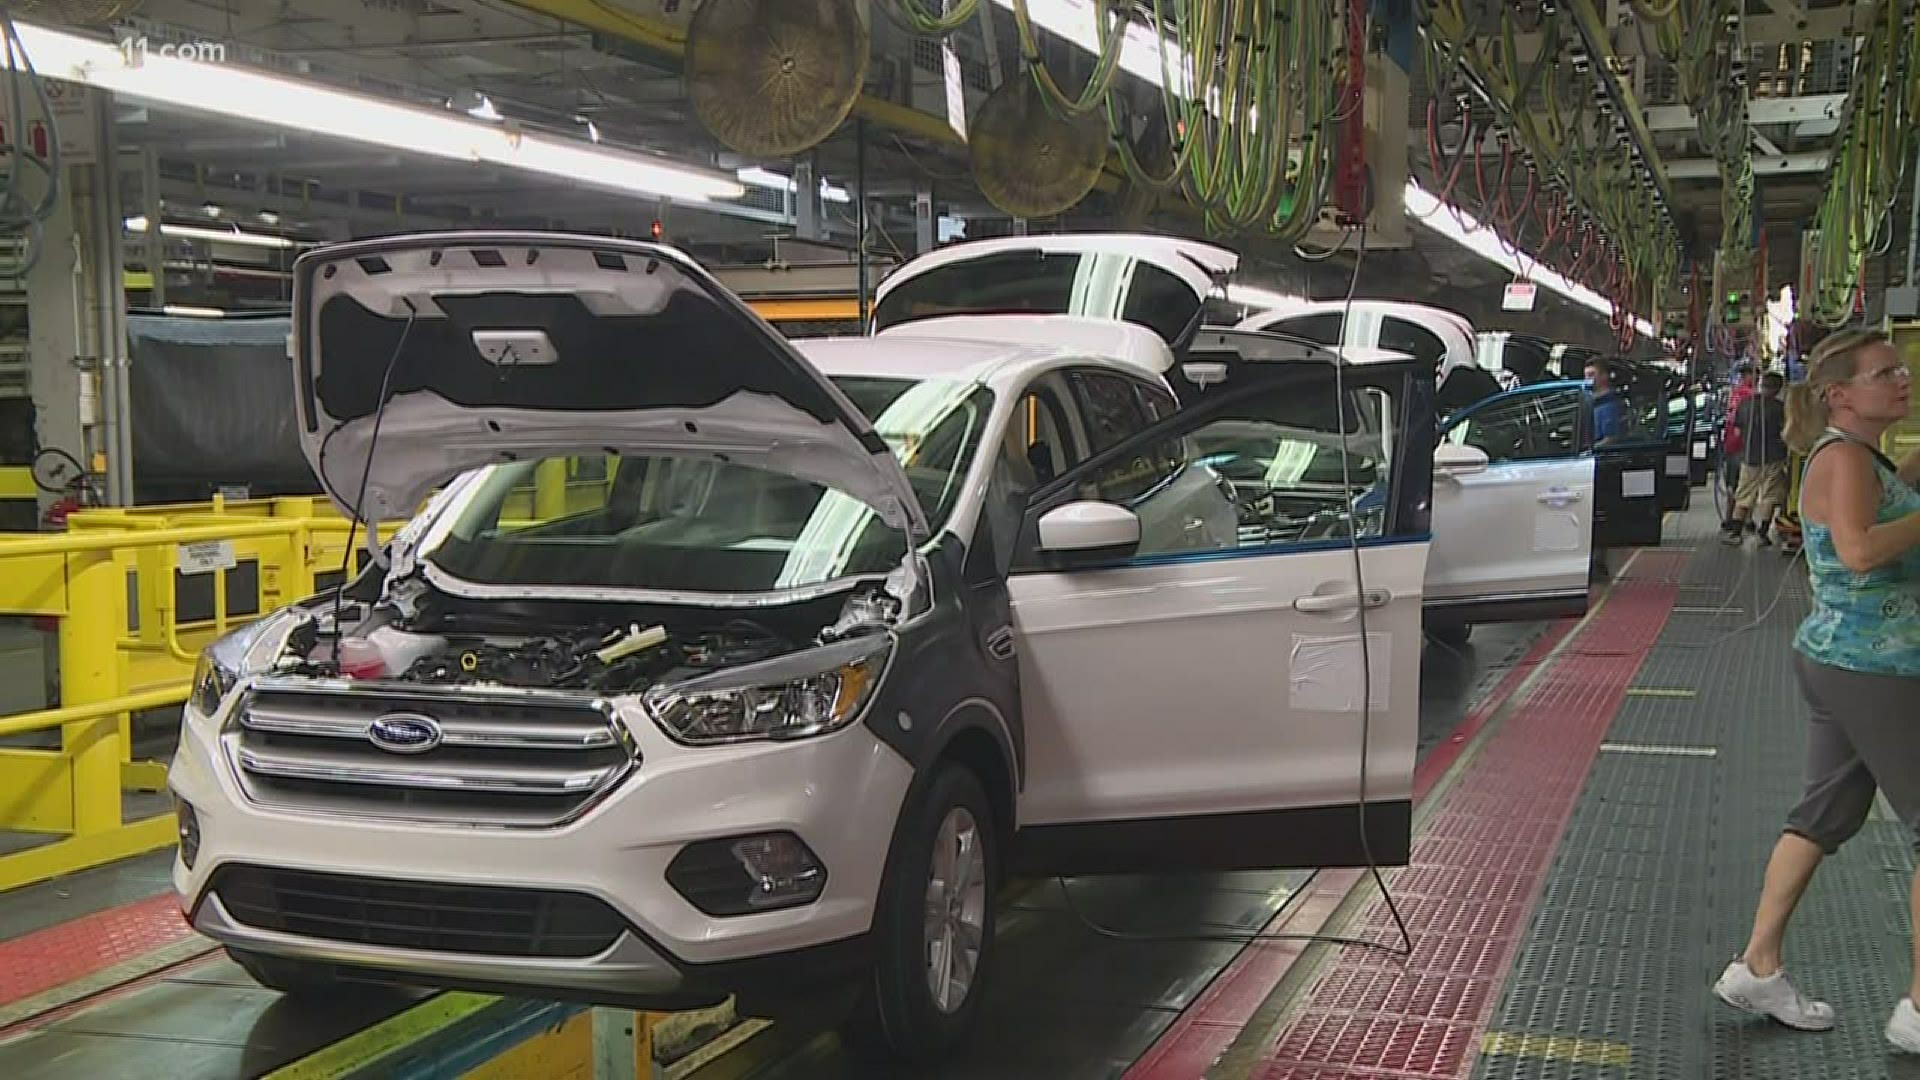 Ford's two big plants in Louisville have been parked on idle, waiting for the green light to start production.